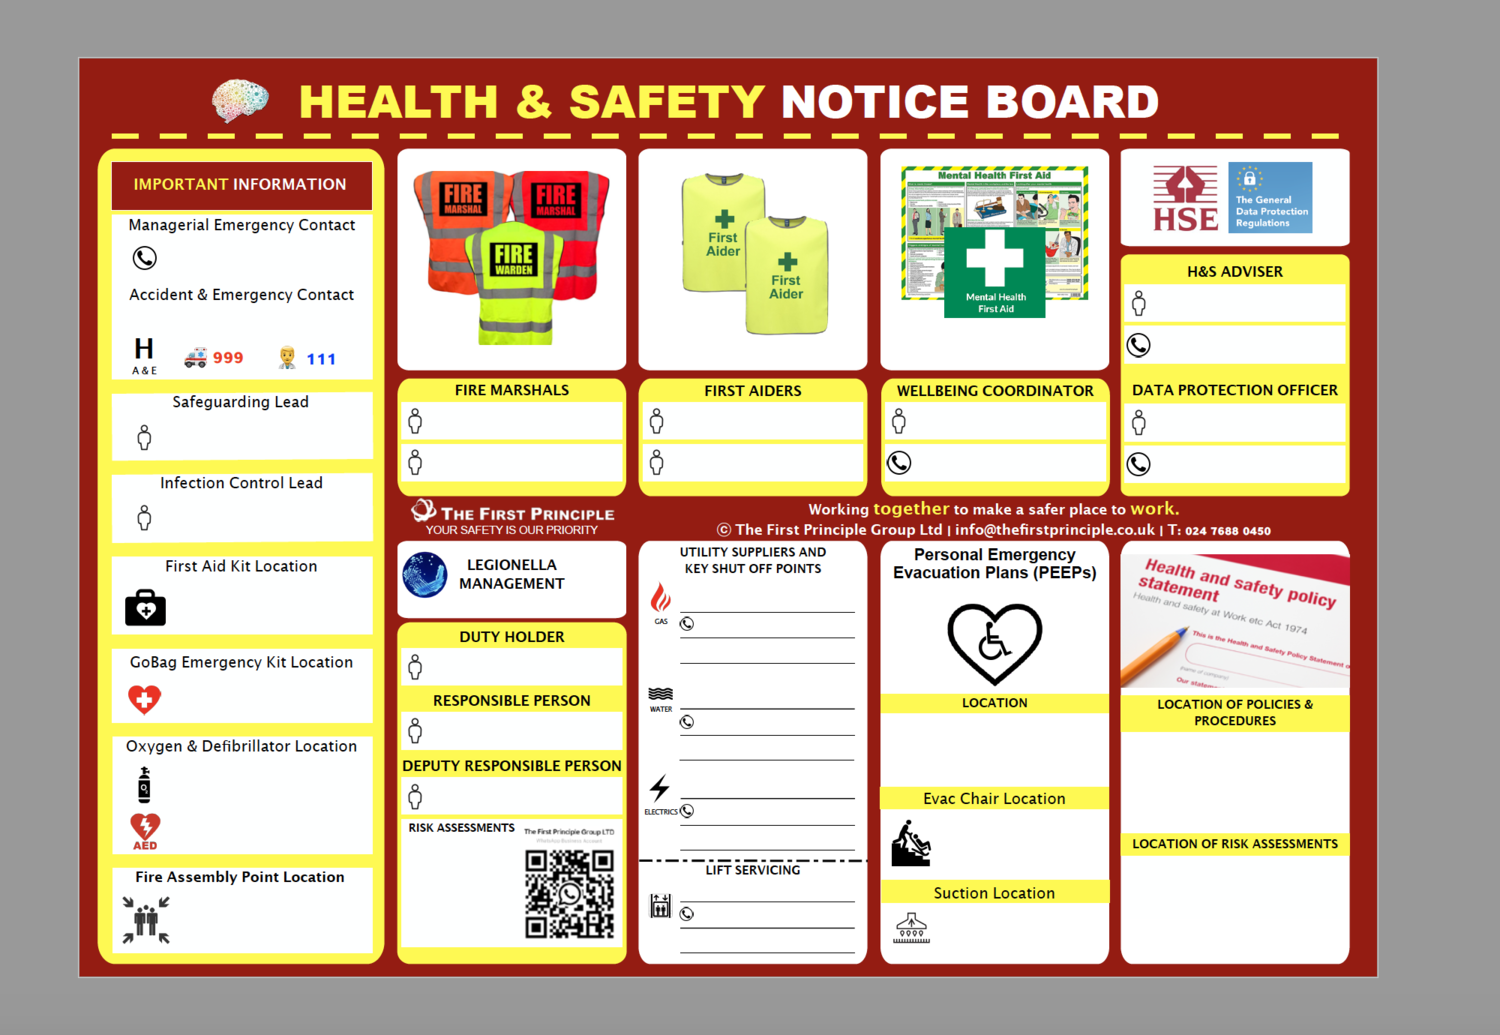 General Health & Safety Notice Board for Care Homes